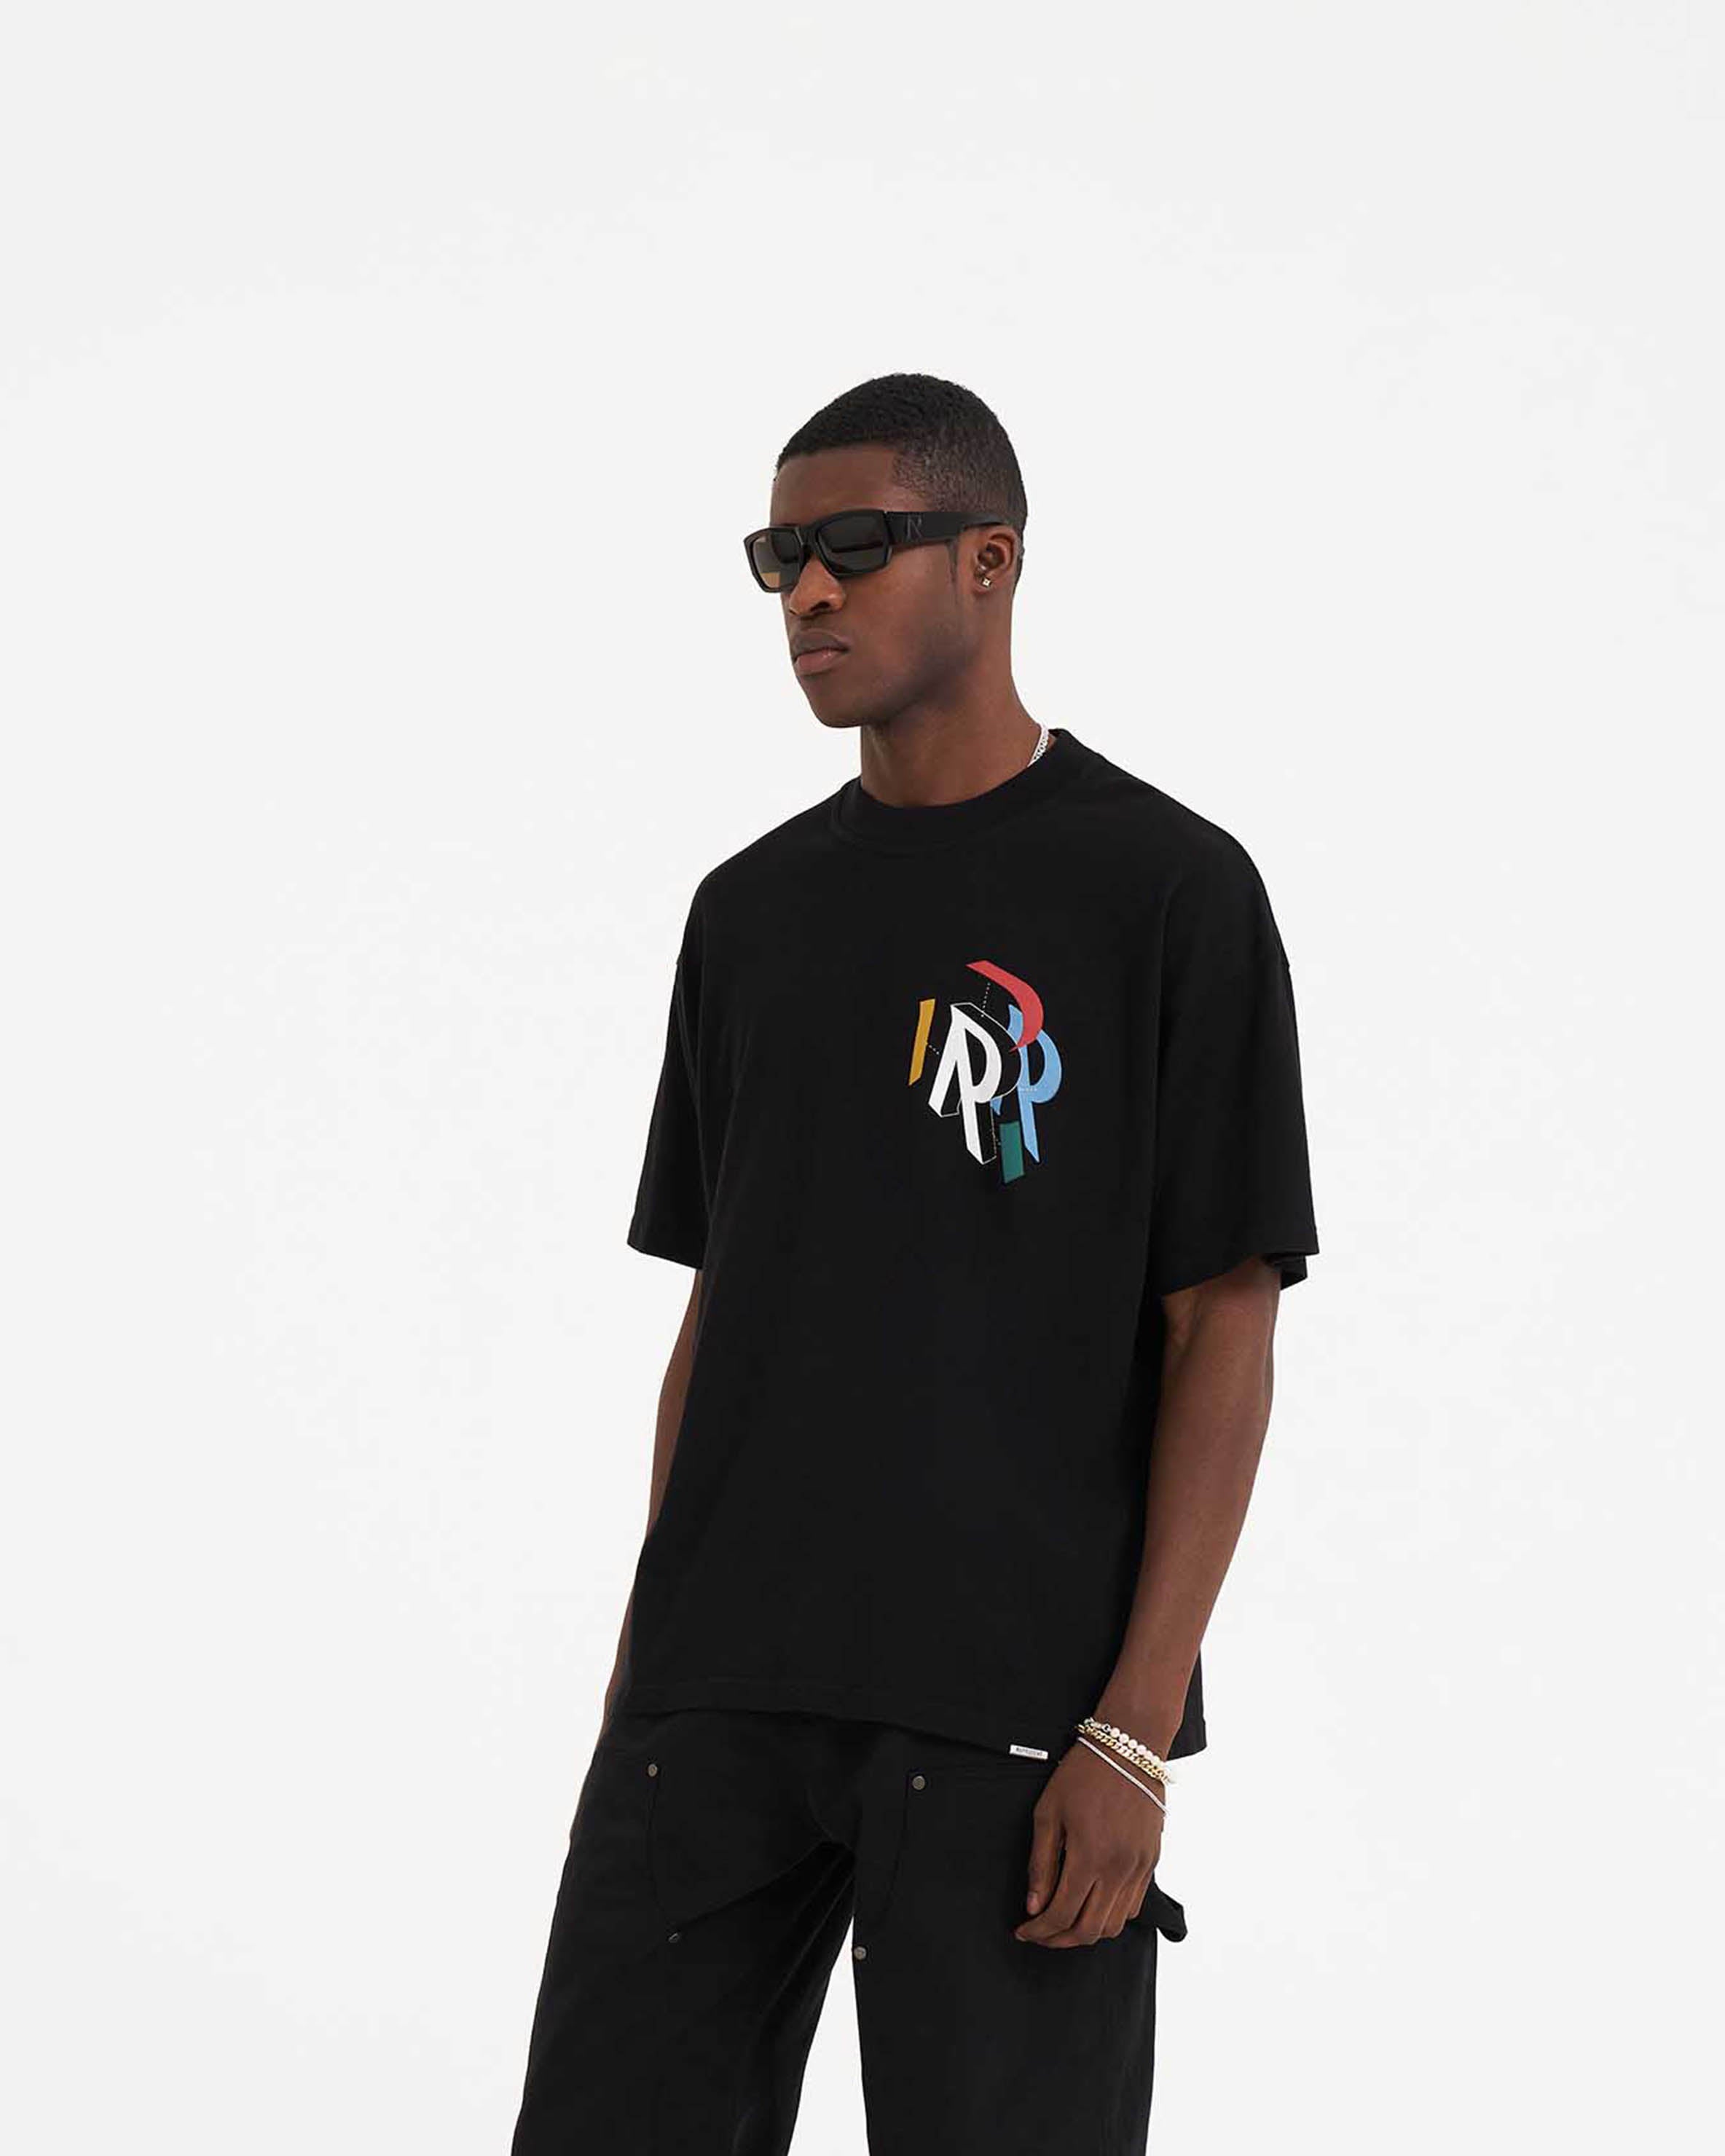 Initial Assembly T-Shirt - Black